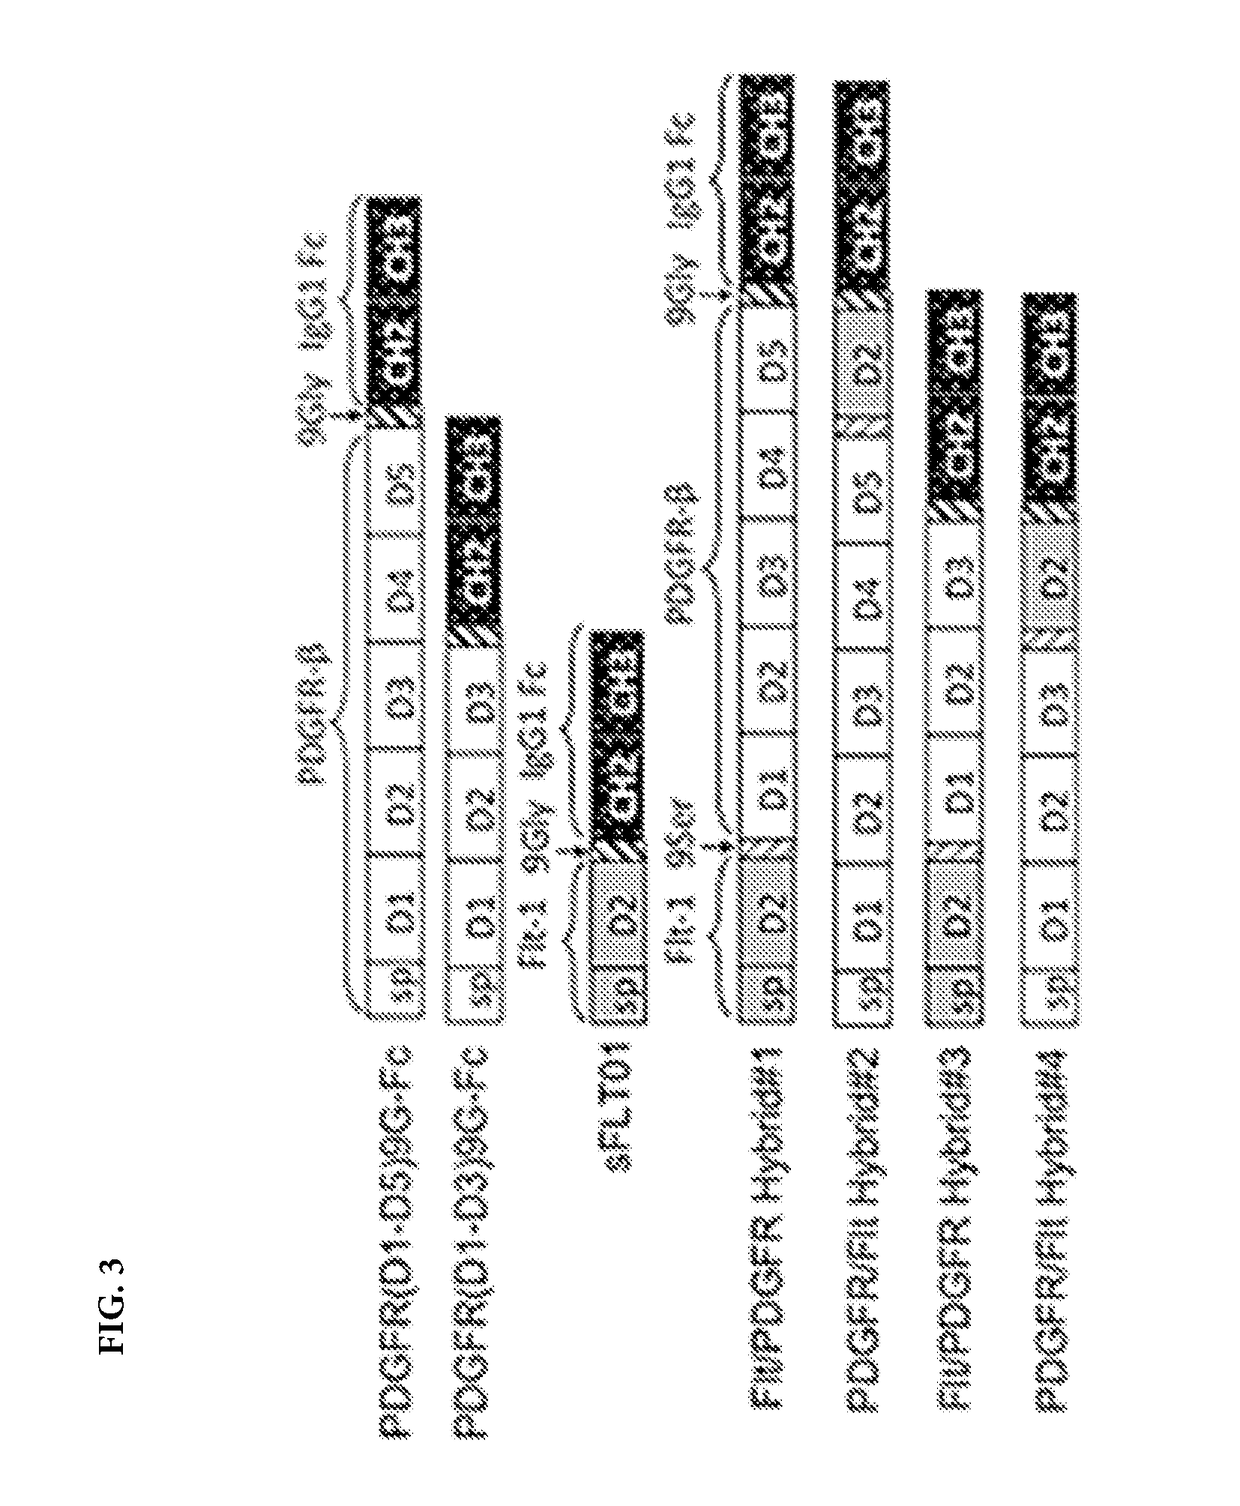 Fusion proteins comprising pdgf and VEGF binding portions and methods of using thereof